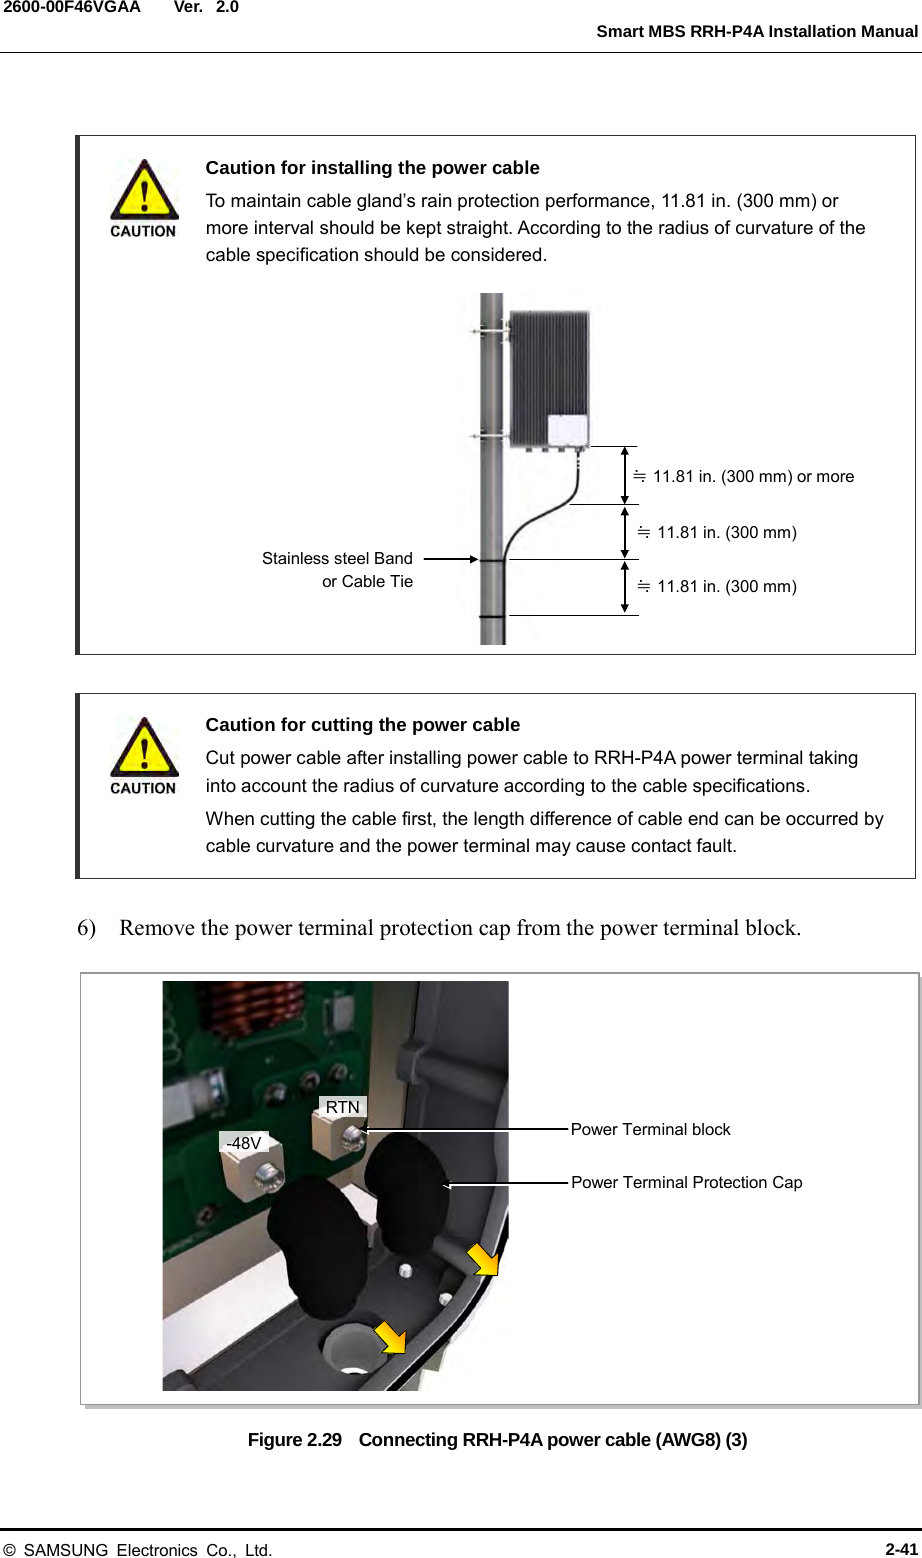  Ver.   Smart MBS RRH-P4A Installation Manual 2600-00F46VGAA 2.0   Caution for installing the power cable  To maintain cable gland’s rain protection performance, 11.81 in. (300 mm) or more interval should be kept straight. According to the radius of curvature of the cable specification should be considered.              Caution for cutting the power cable    Cut power cable after installing power cable to RRH-P4A power terminal taking into account the radius of curvature according to the cable specifications.  When cutting the cable first, the length difference of cable end can be occurred by cable curvature and the power terminal may cause contact fault.  6)    Remove the power terminal protection cap from the power terminal block.  Figure 2.29    Connecting RRH-P4A power cable (AWG8) (3) Stainless steel Band  or Cable Tie  ≒ 11.81 in. (300 mm) or more ≒ 11.81 in. (300 mm) ≒ 11.81 in. (300 mm) RTN -48V Power Terminal Protection Cap Power Terminal block © SAMSUNG Electronics Co., Ltd. 2-41 